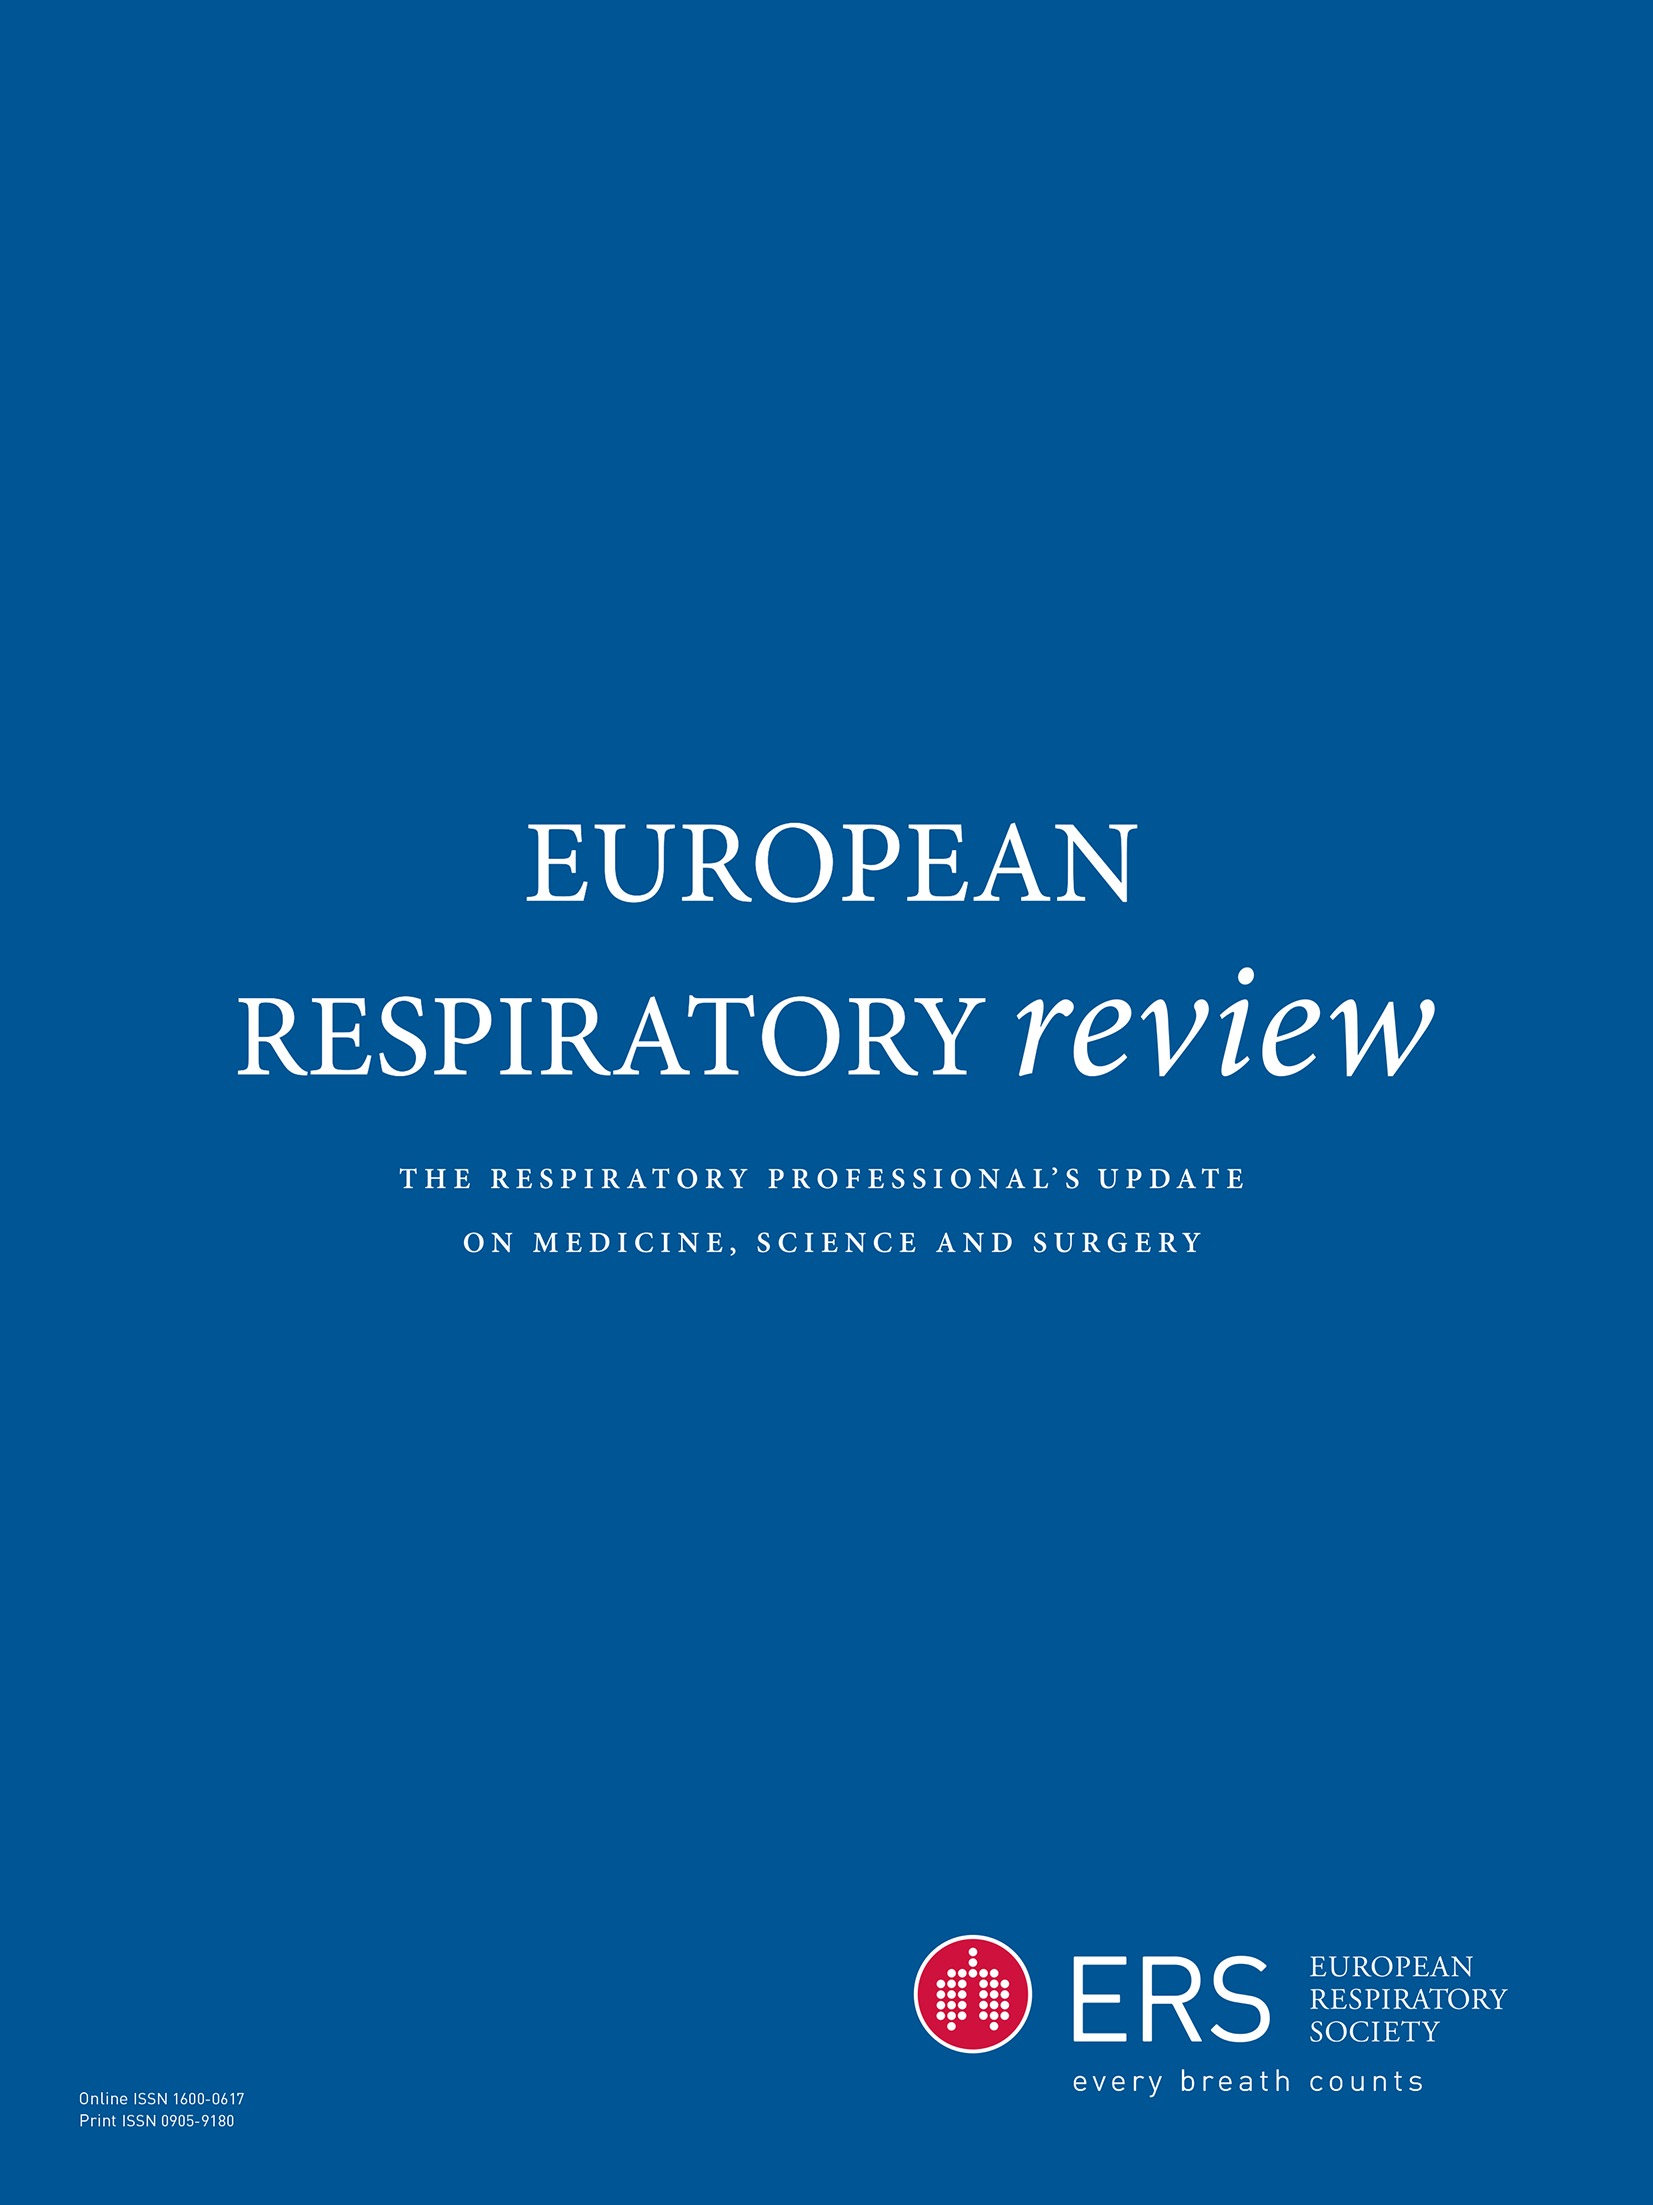 Molecular monitoring of lung allograft health: is it ready for routine clinical use?